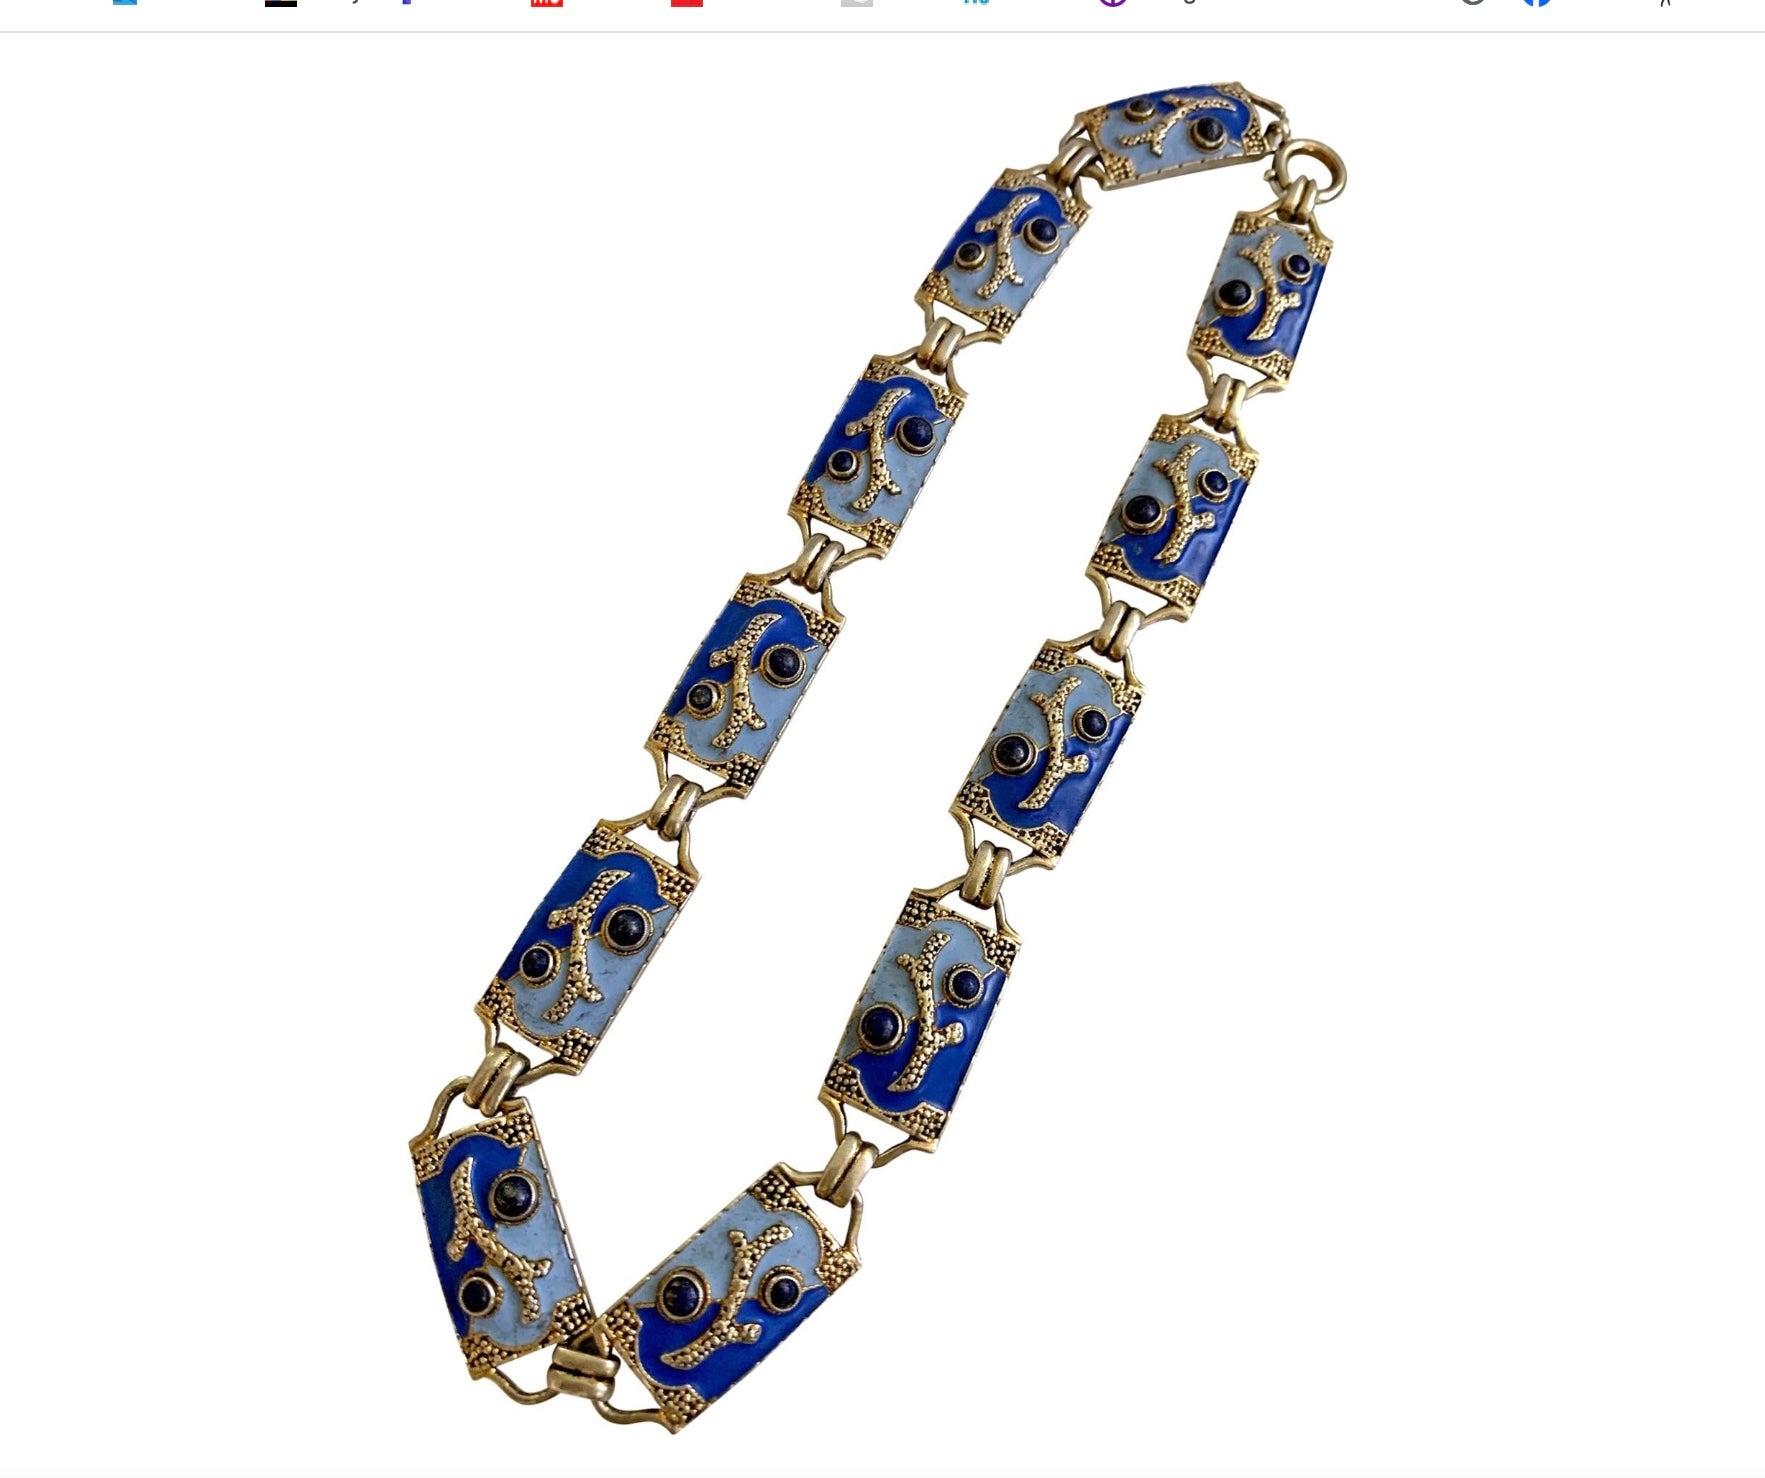 Indulge in a rare and wonderful Theodor Fahrner Necklace with Blue Enamel and Lapis Lazuli in a coral sea motif design in Sterling Silver.   This magnificent necklace is made up of 11 links featuring light and darker blue enamel with a gold scroll